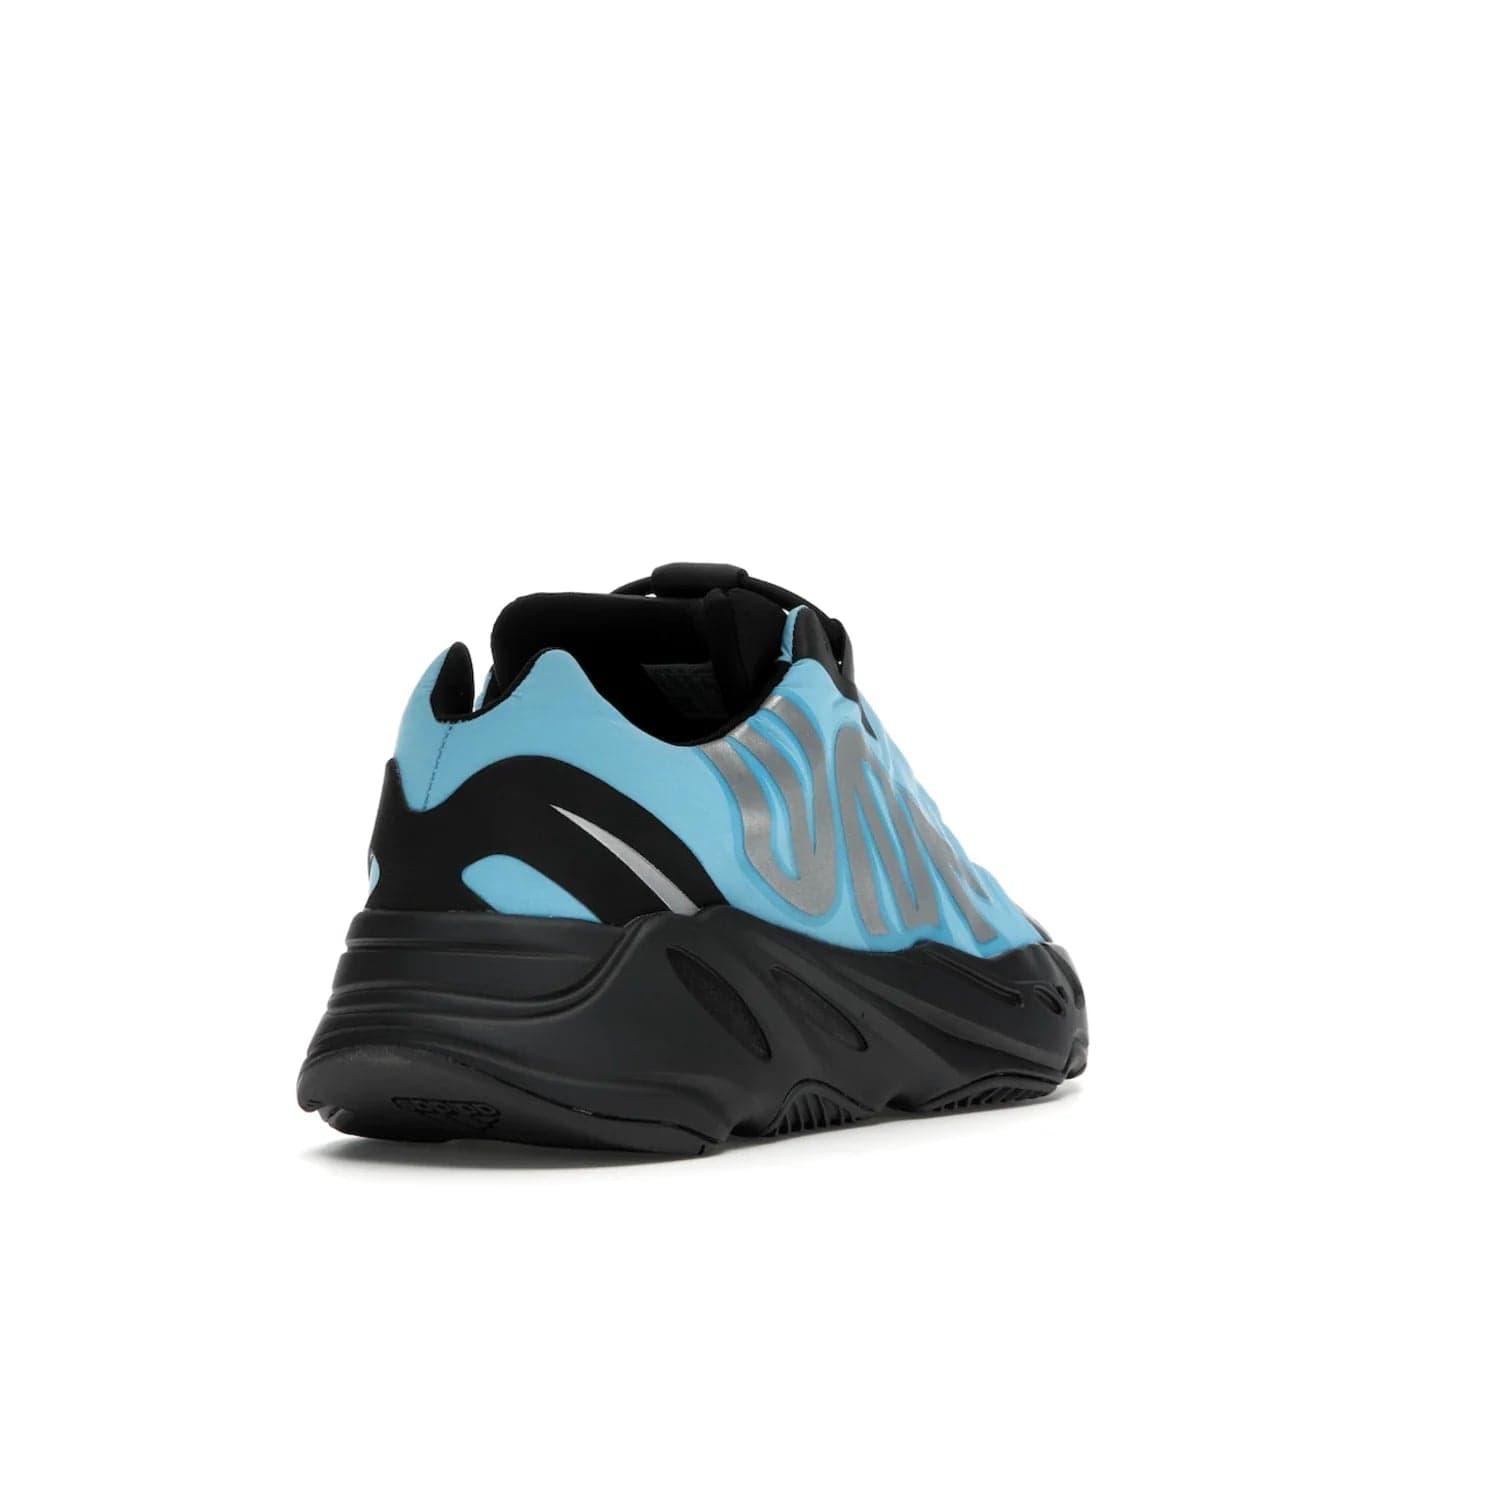 adidas Yeezy Boost 700 MNVN Bright Cyan - Image 31 - Only at www.BallersClubKickz.com - The adidas Yeezy Boost 700 MNVN features a Bright Cyan nylon upper with iconic "700" graphics and a sculptural black Boost sole for superior style and comfort. Step into legendary style and comfort in June 2021.